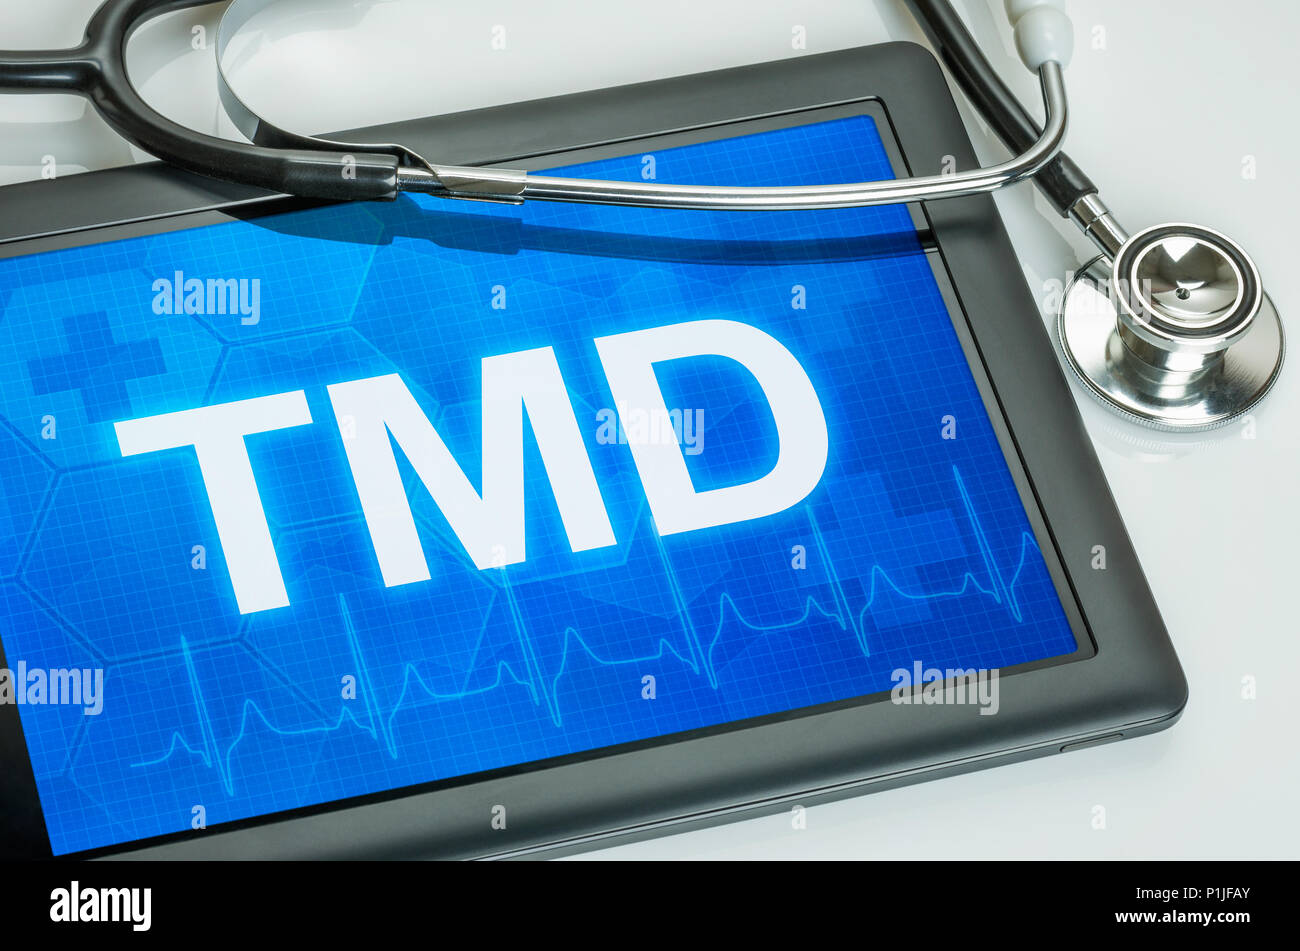 Tablet with the text TMD on the display Stock Photo